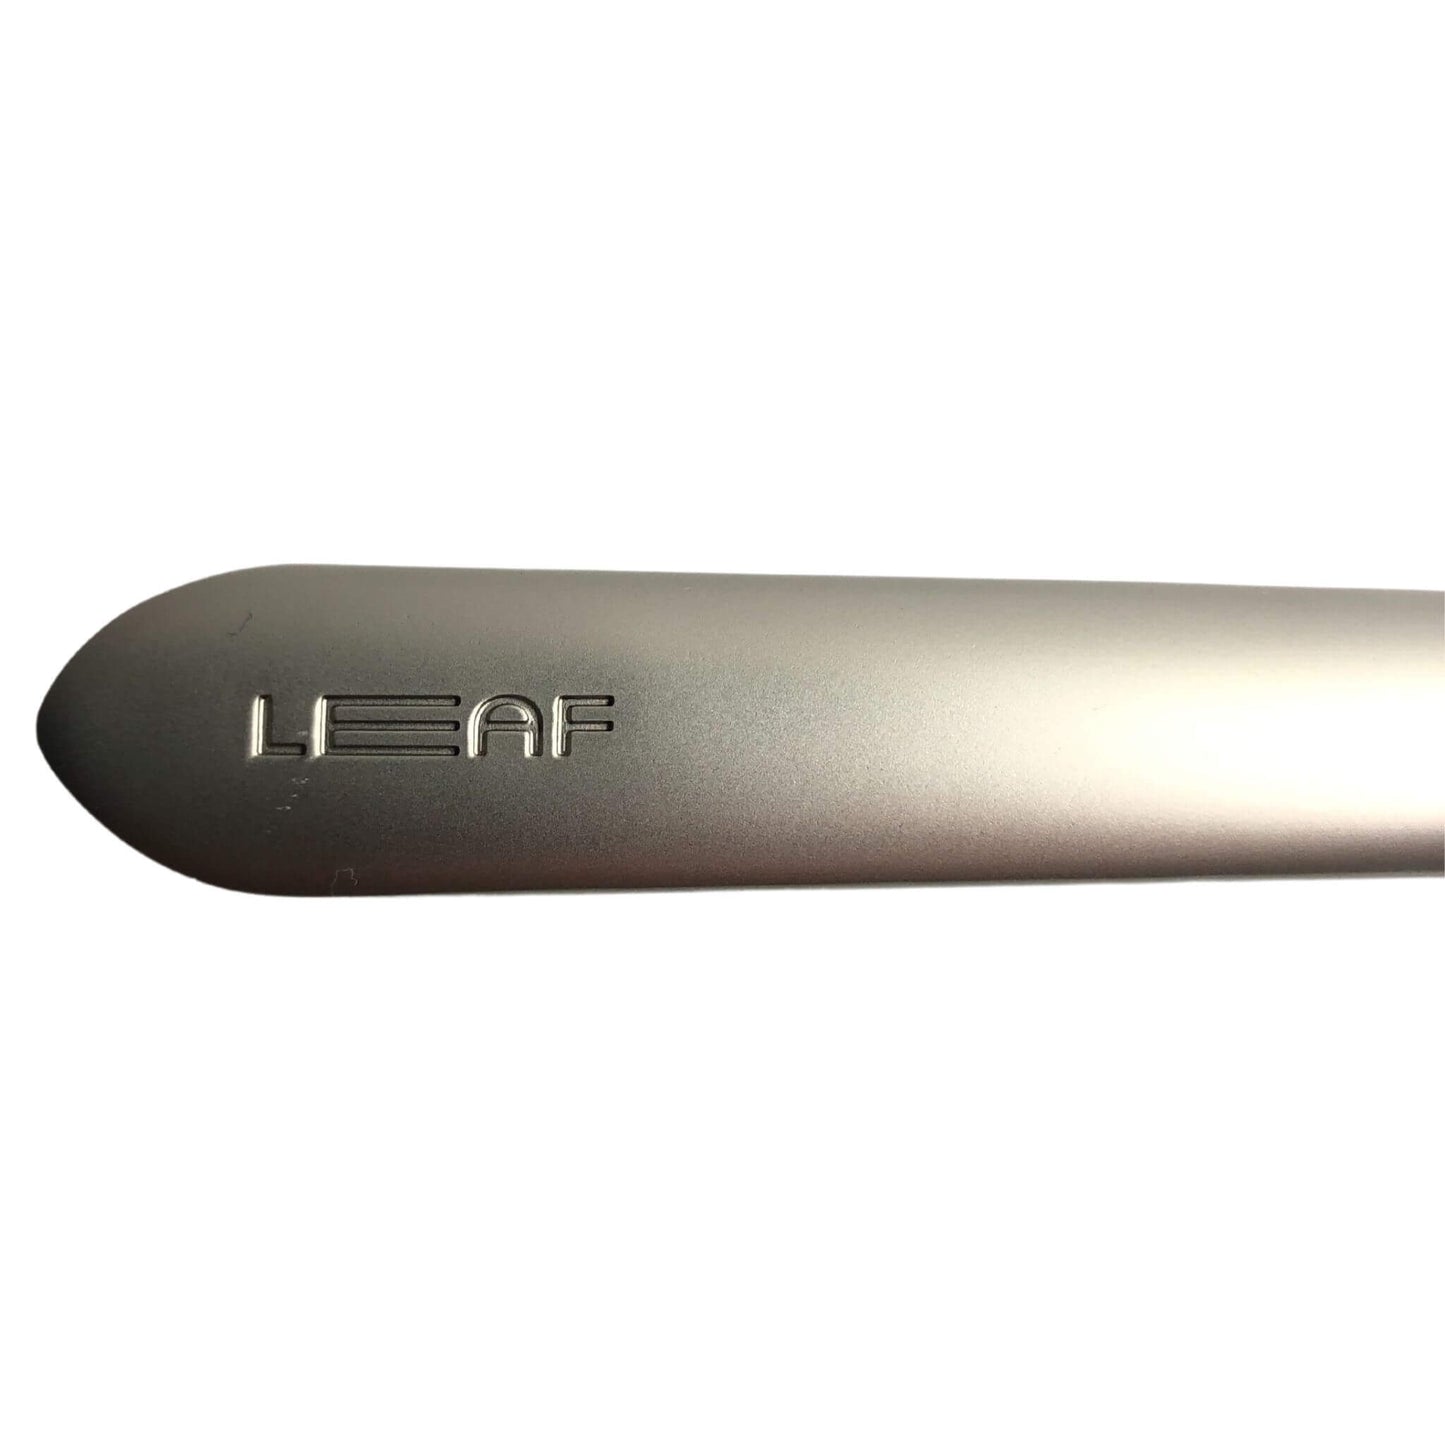 The Leaf pivoting head sustainable razor. matte satin-silver finish. Each razor comes with a 10 pack of blades 